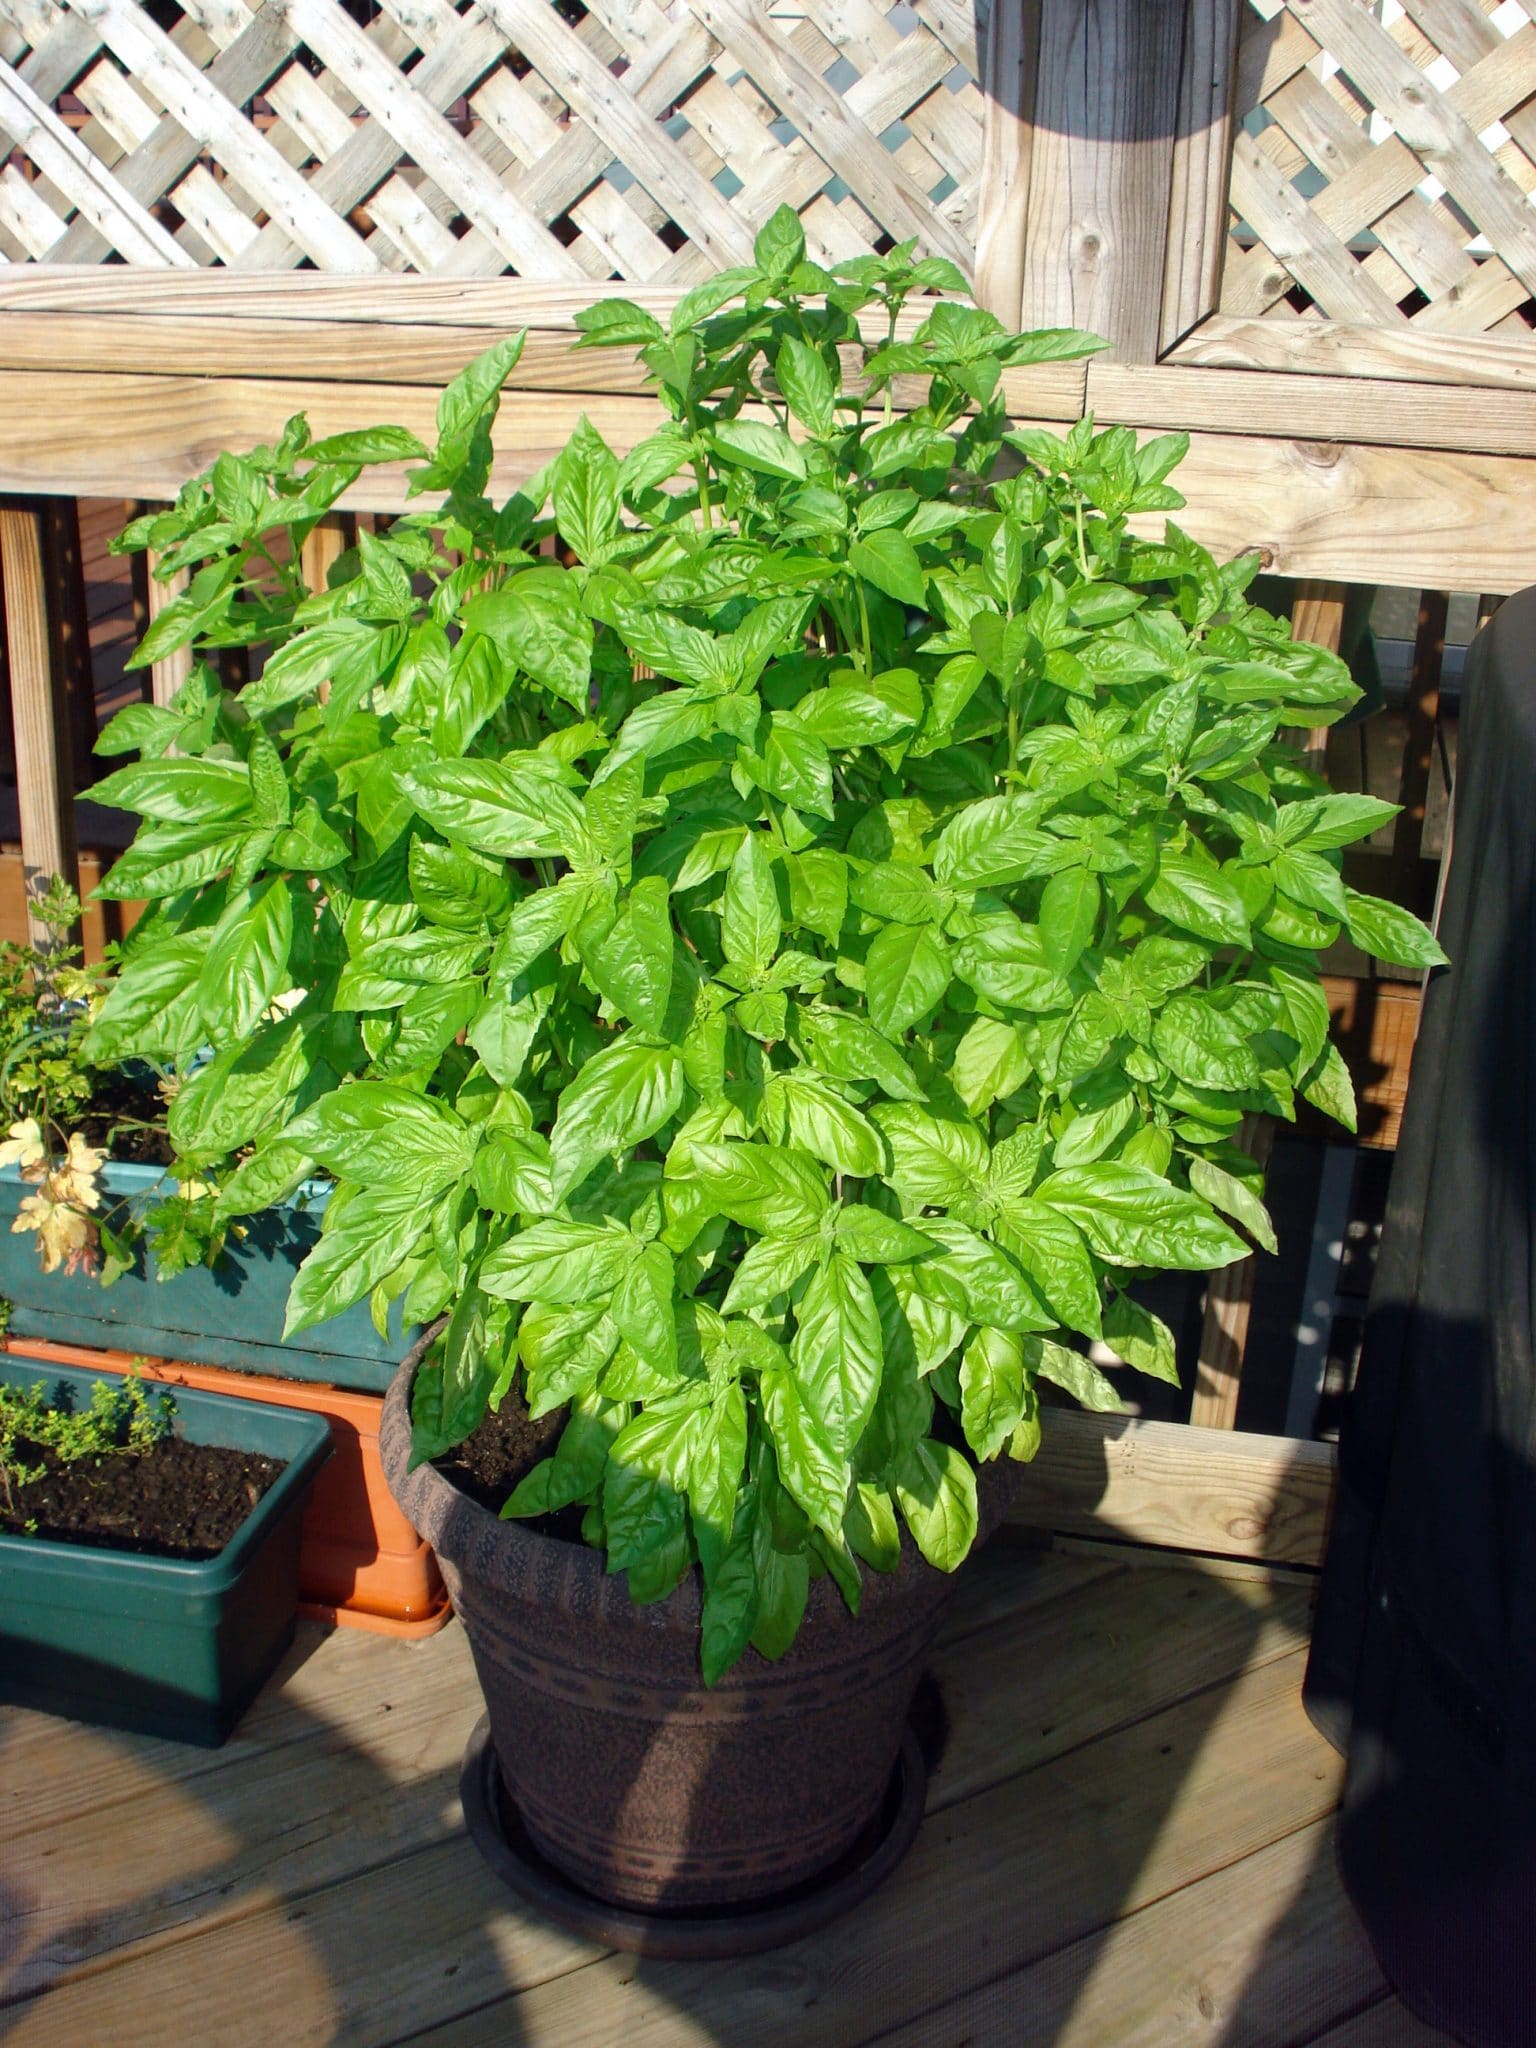 Potted plant of basil that has grown very tall